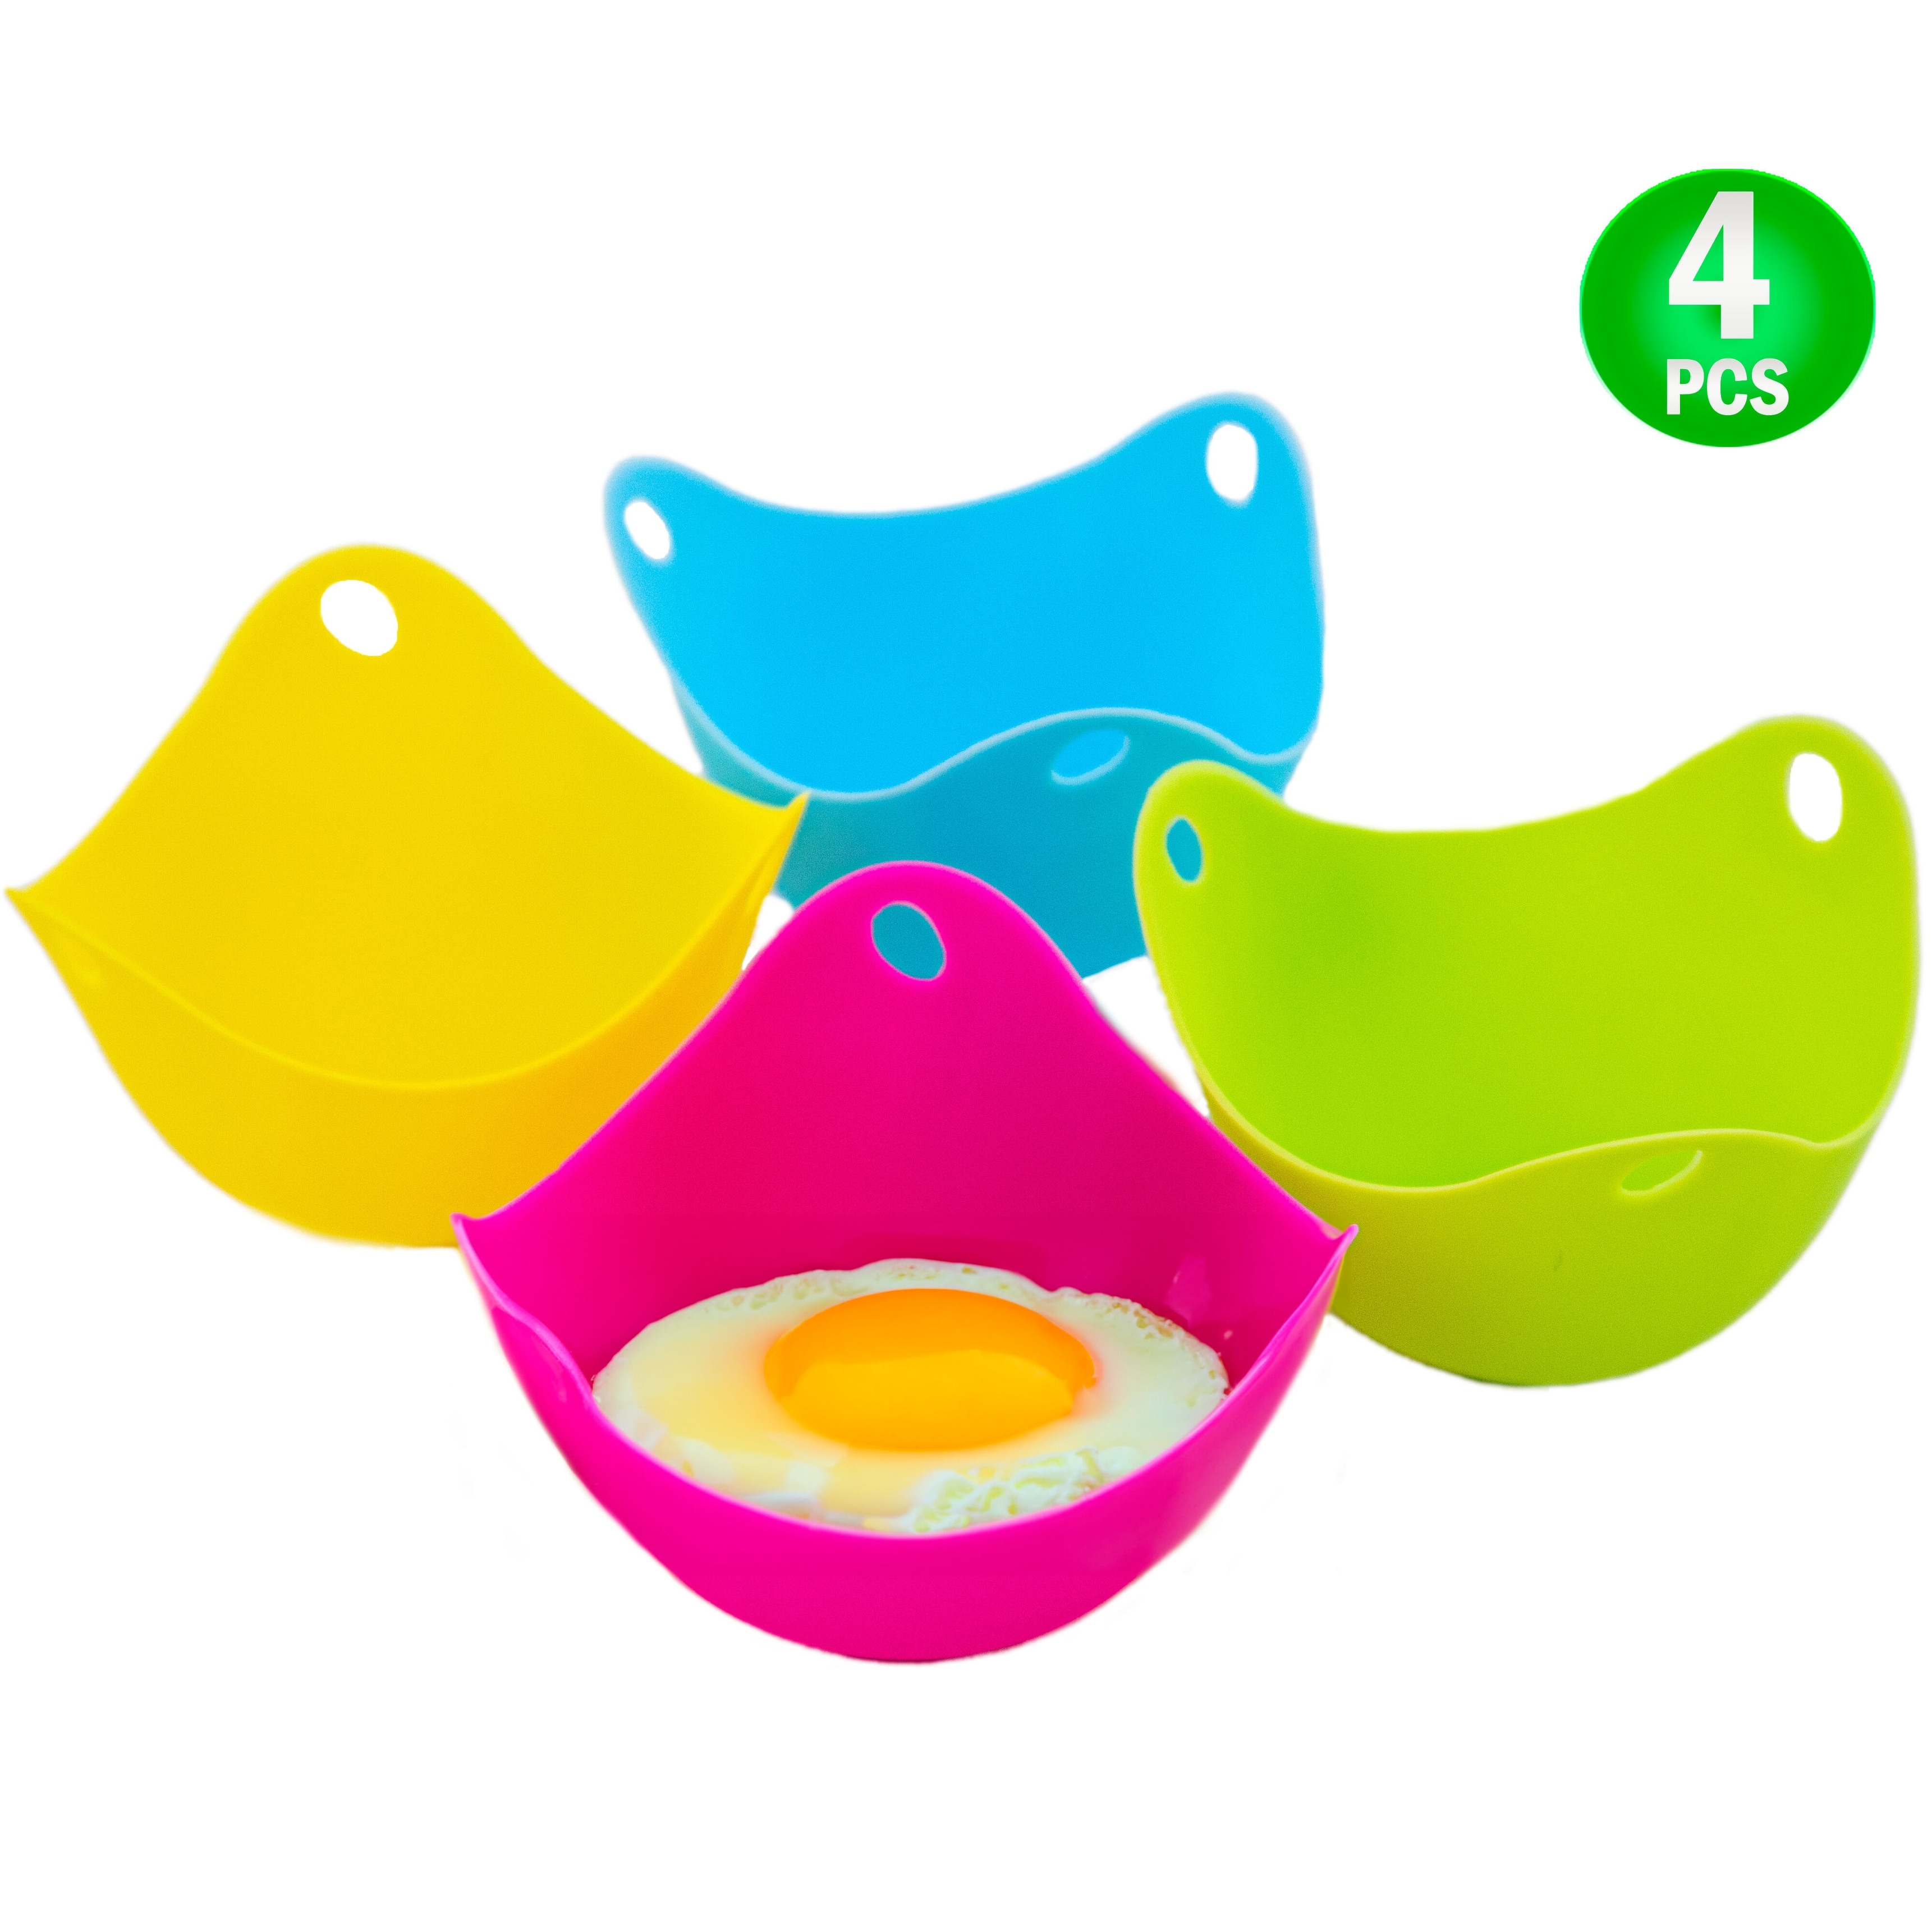 https://ak1.ostkcdn.com/images/products/is/images/direct/48c3a8bb391f80d4fd07e3fa652984a80450de6e/Egg-Poacher-Silicone-Cup-8pc-Set-Microwave-%26-Stovetop-Boiler-Safe-Poached-Eggs.jpg